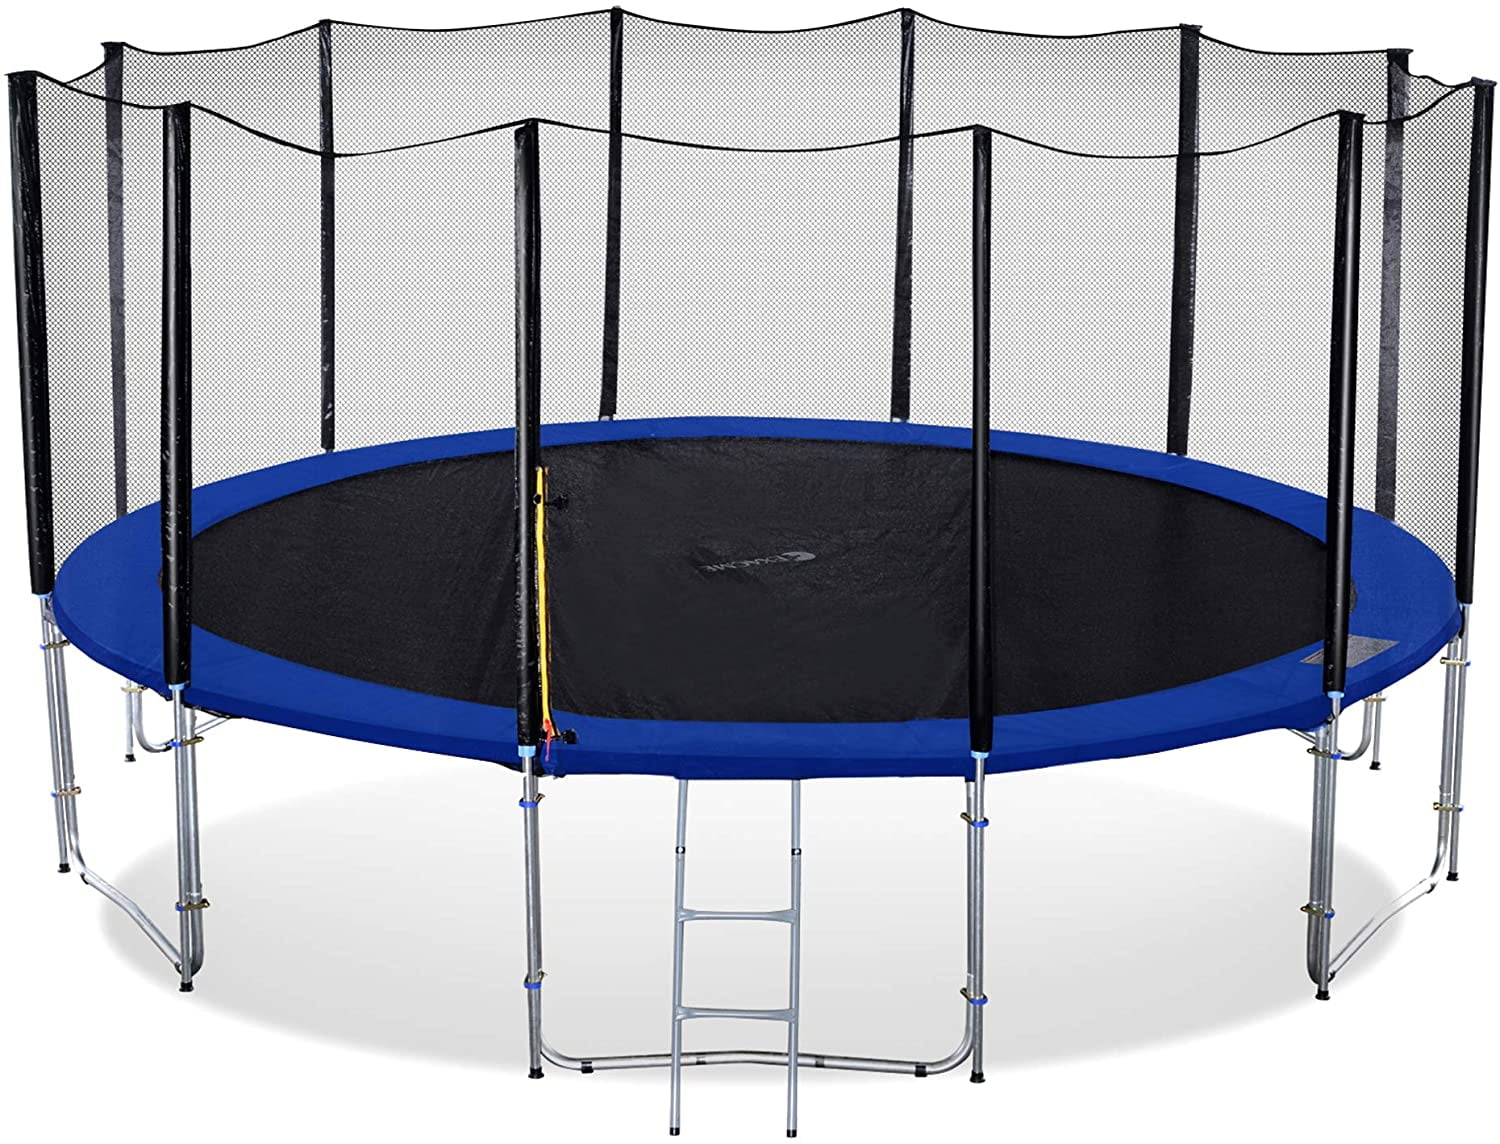 Exacme Big Outdoor Trampoline With Enclosure and Ladder Spring Cover, Heavy Duty, 6180-T16 Walmart.com